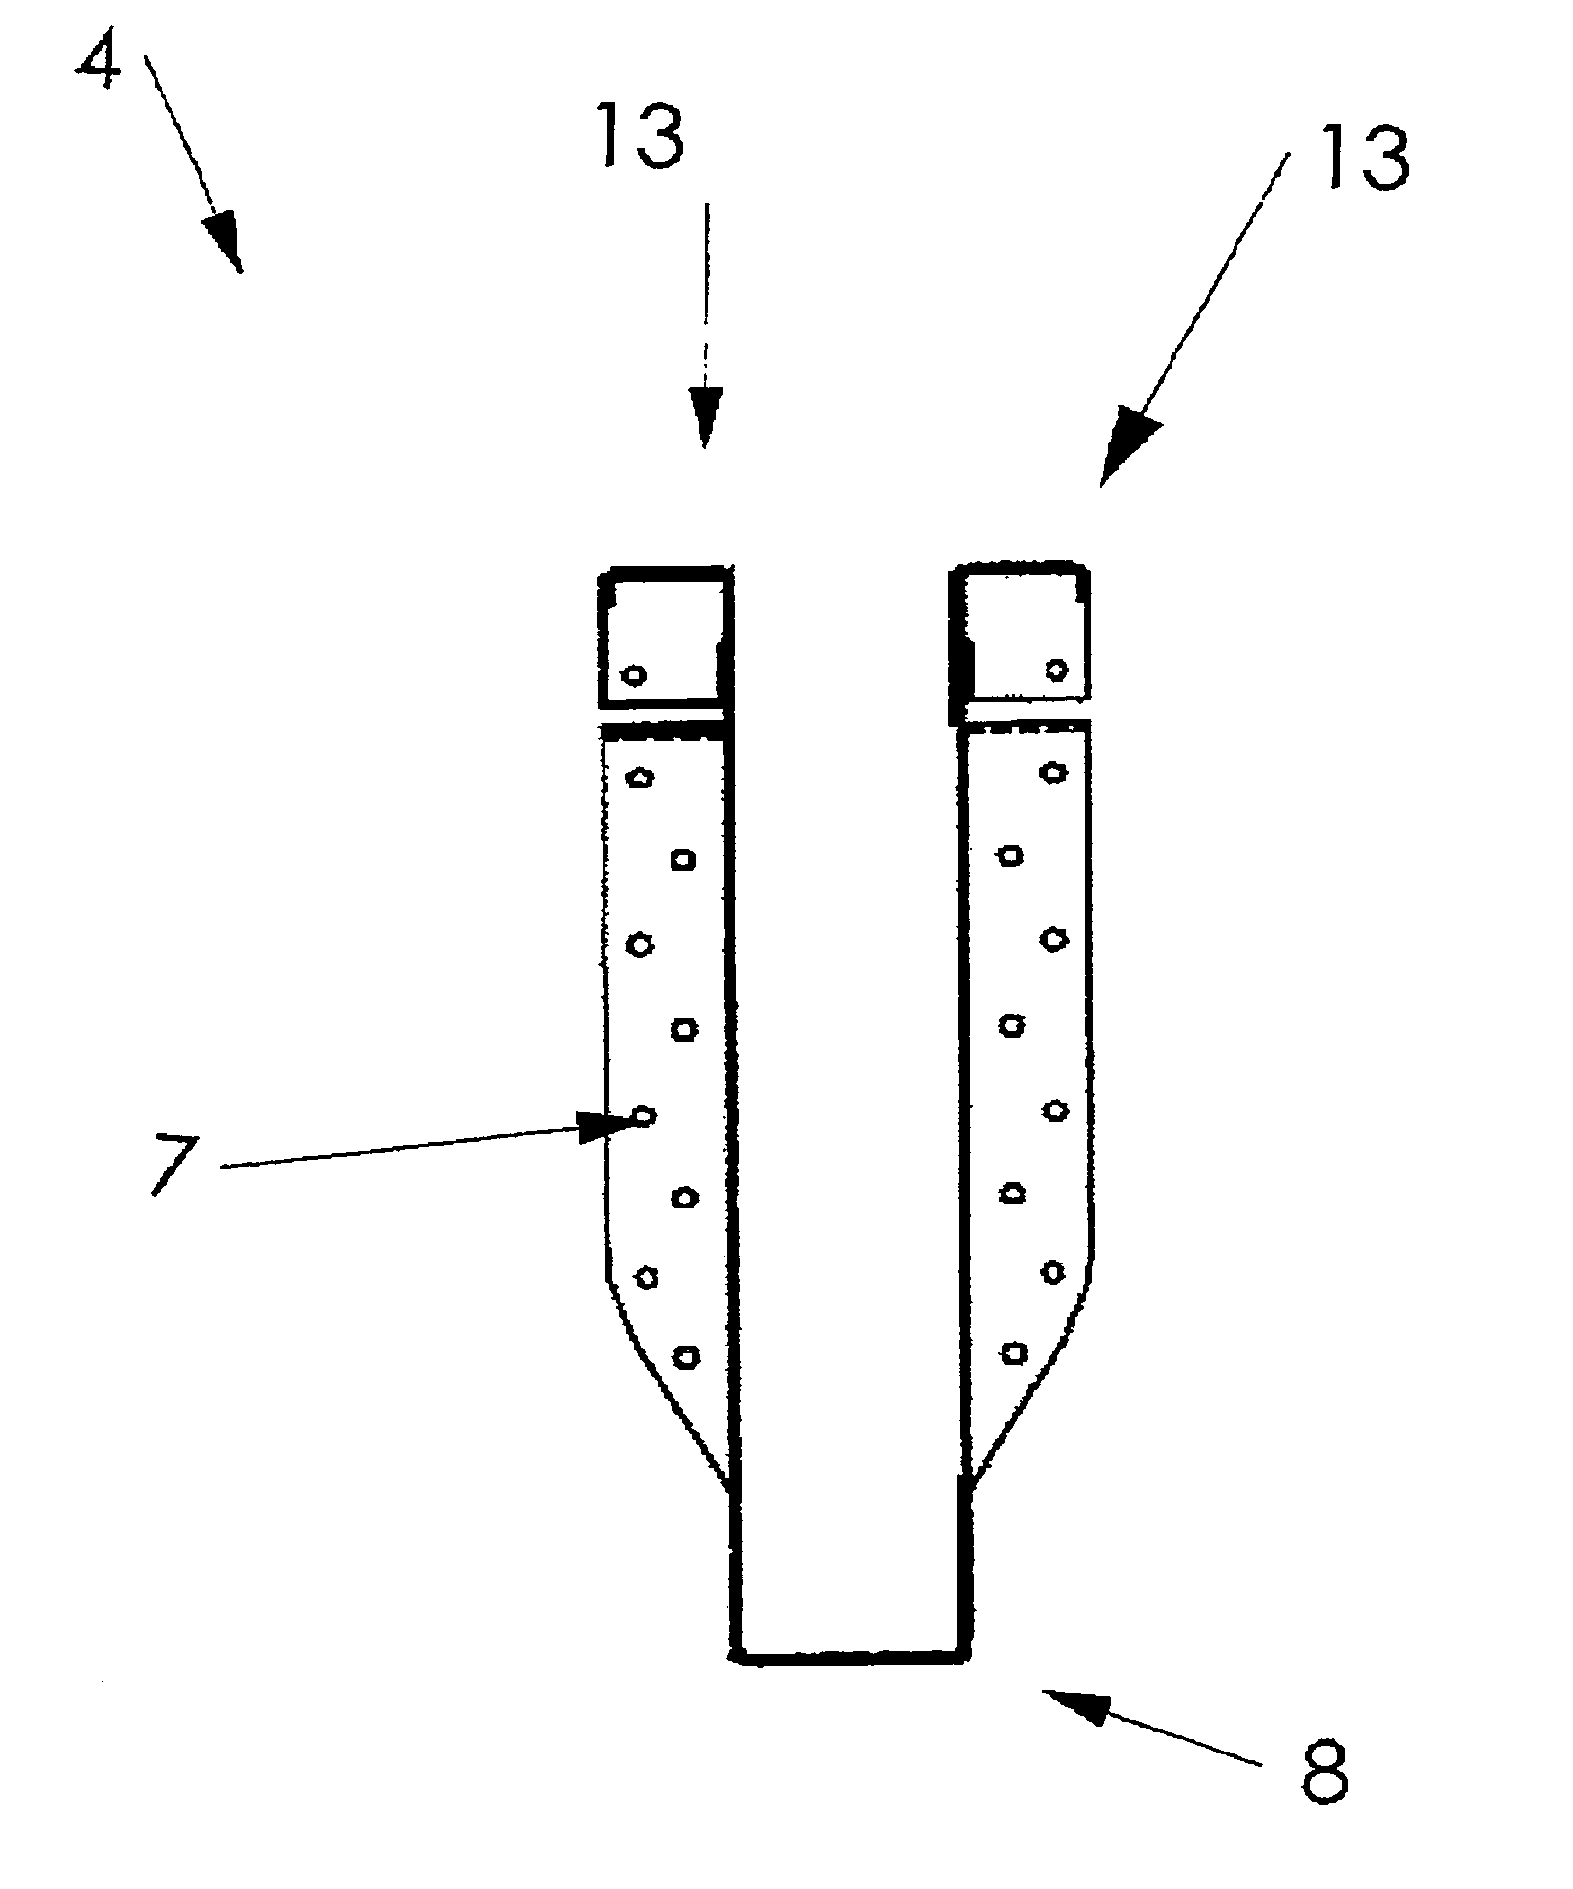 Method and system of framing components and hangers used in a structural interface